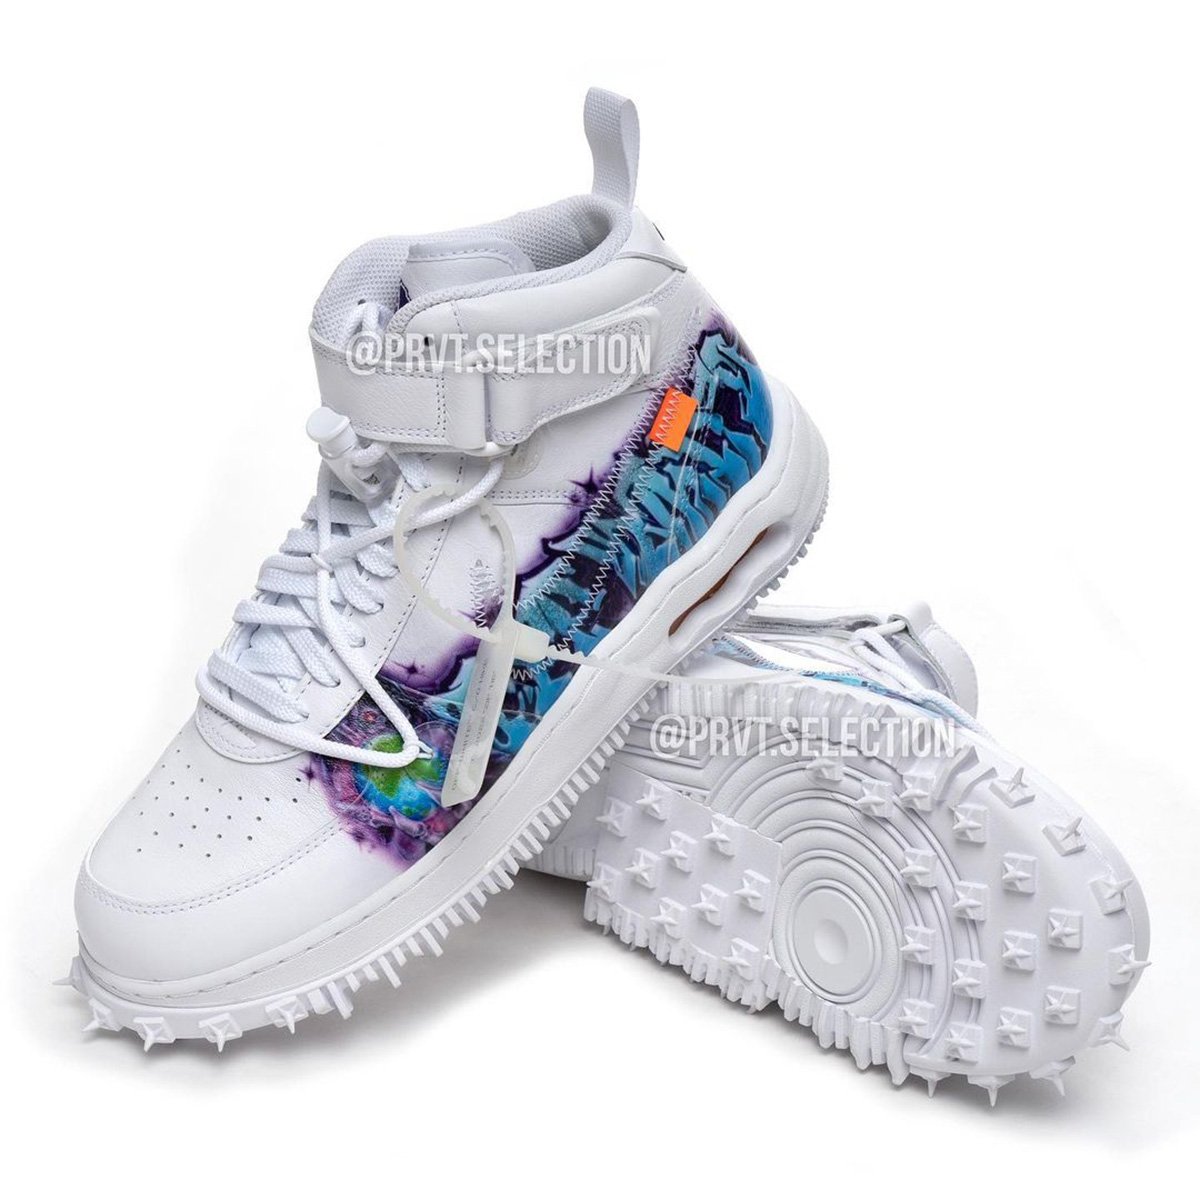 Graffiti Lettering Sits On Top of the Fierce Off-White x Nike Air